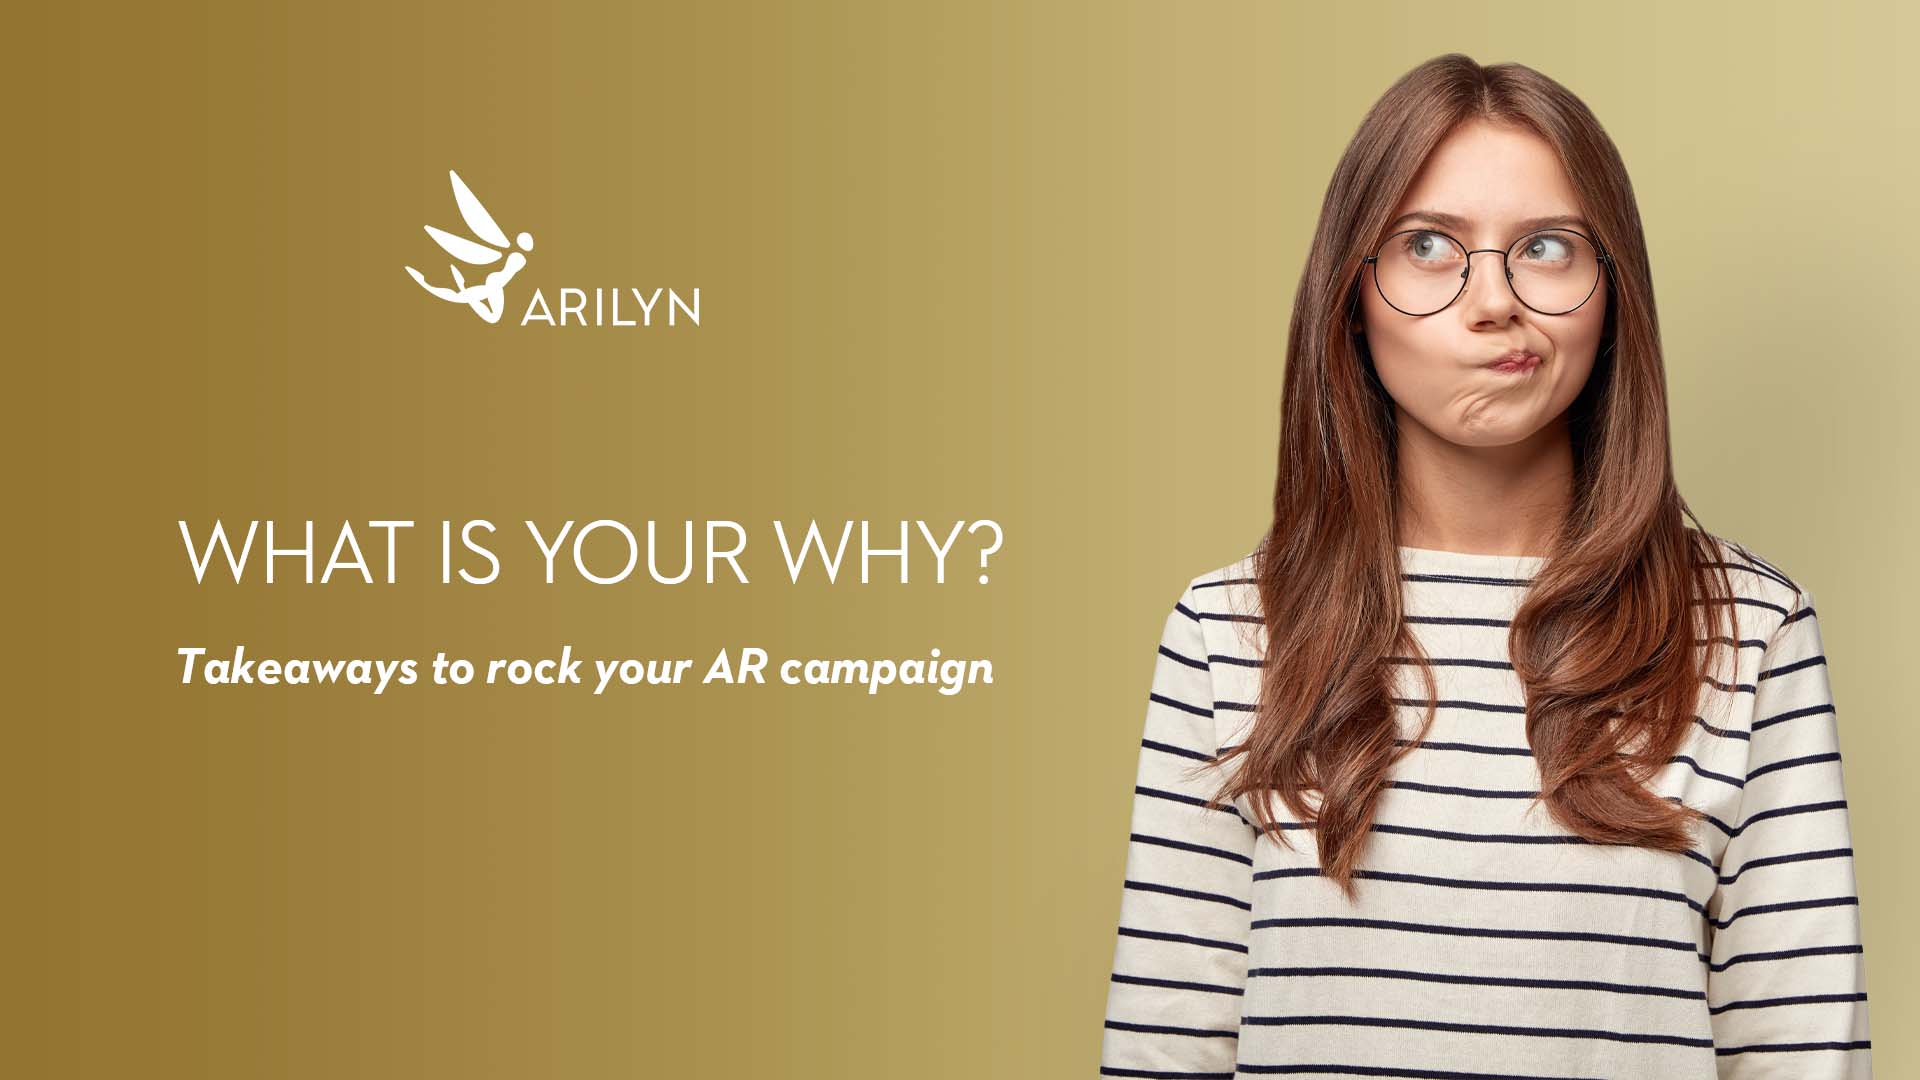 3 takeaways from Simon Sinek's Start With Why to rock your AR campaign